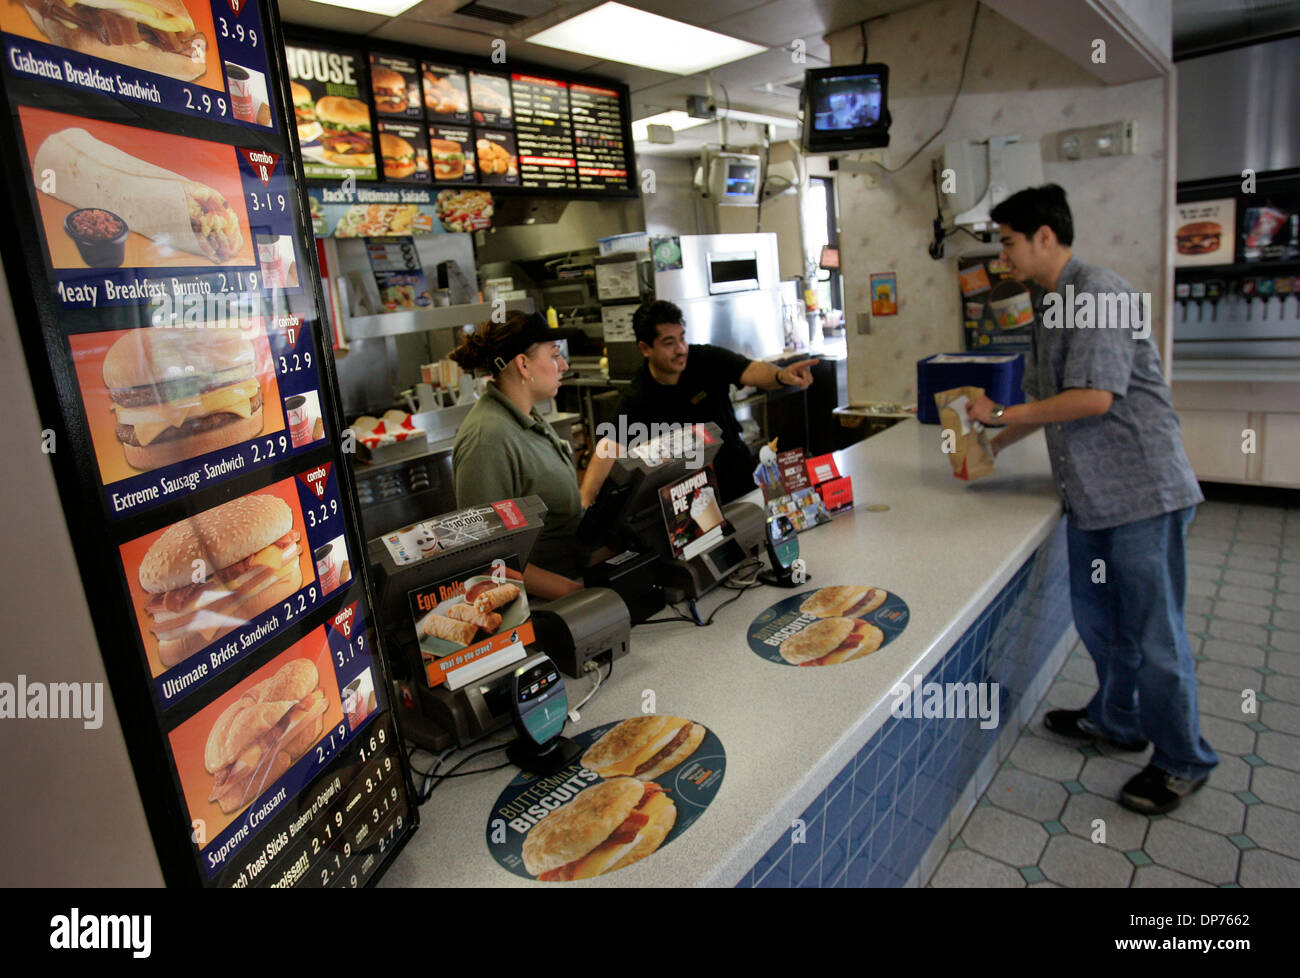 Nov 01, 2006; San Diego, CA, USA;  At the Jack In The Box restaurant on Hazard Center Drive JOANNA GARCIA, left, and manager JAIME CARMONA, center, serve PATRICK LIM, right, visiting from the Philippines his to go order of a Meaty Breakfast Burrito.  Mandatory Credit: Photo by Howard Lipin/SDU-T/ZUMA Press. (©) Copyright 2006 by SDU-T Stock Photo